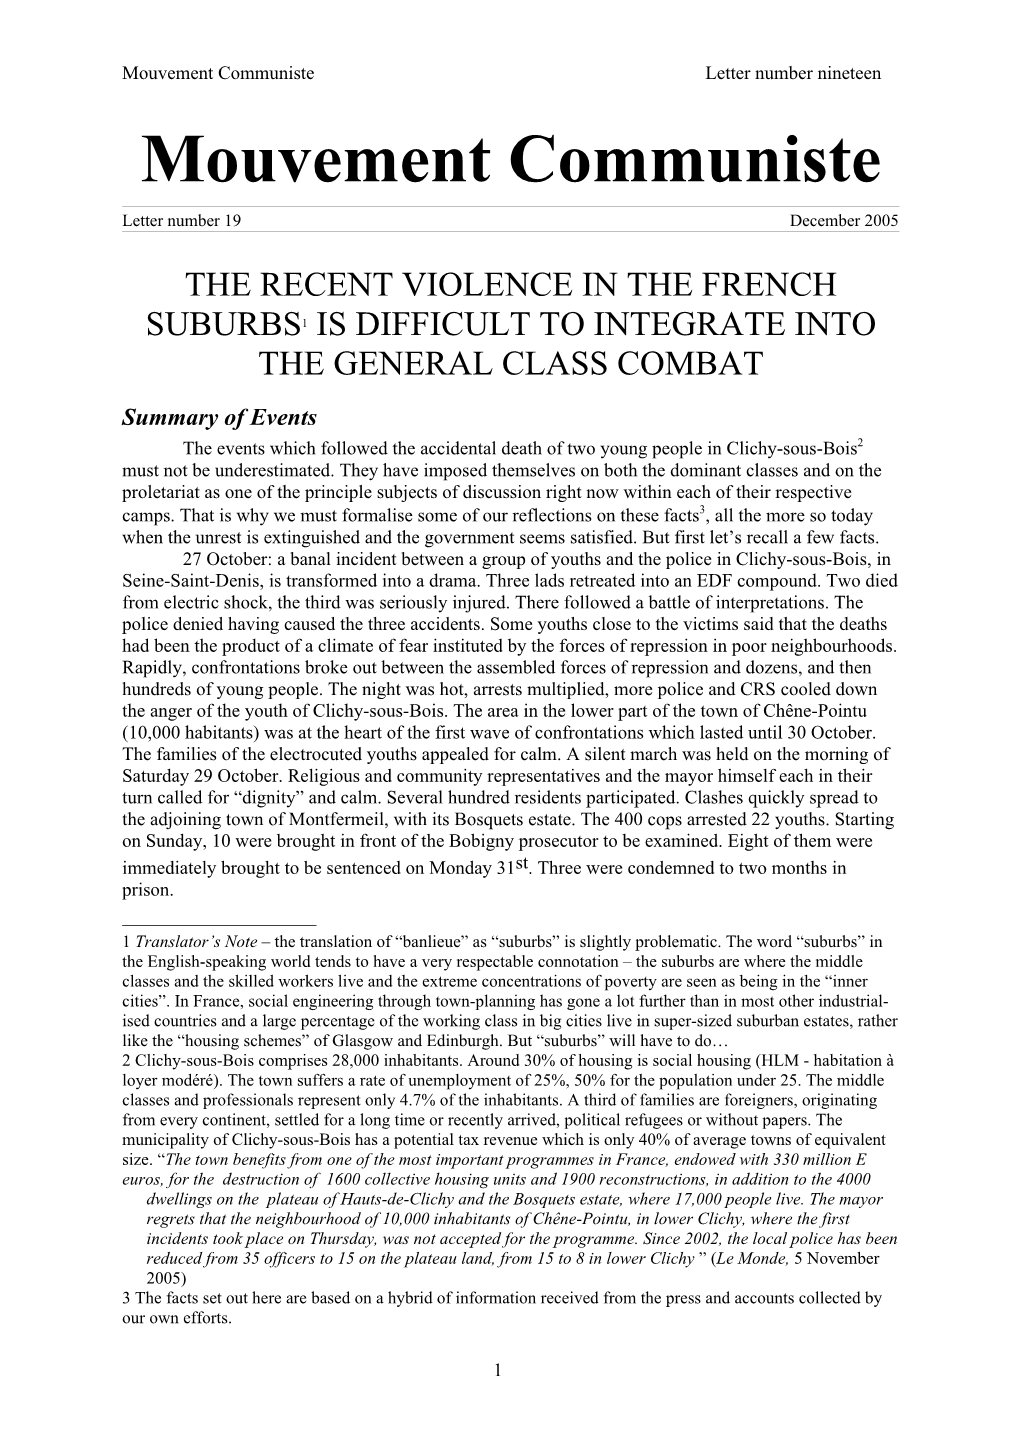 Violence in the French Suburbs1 Is Difficult to Integrate Into the General Class Combat